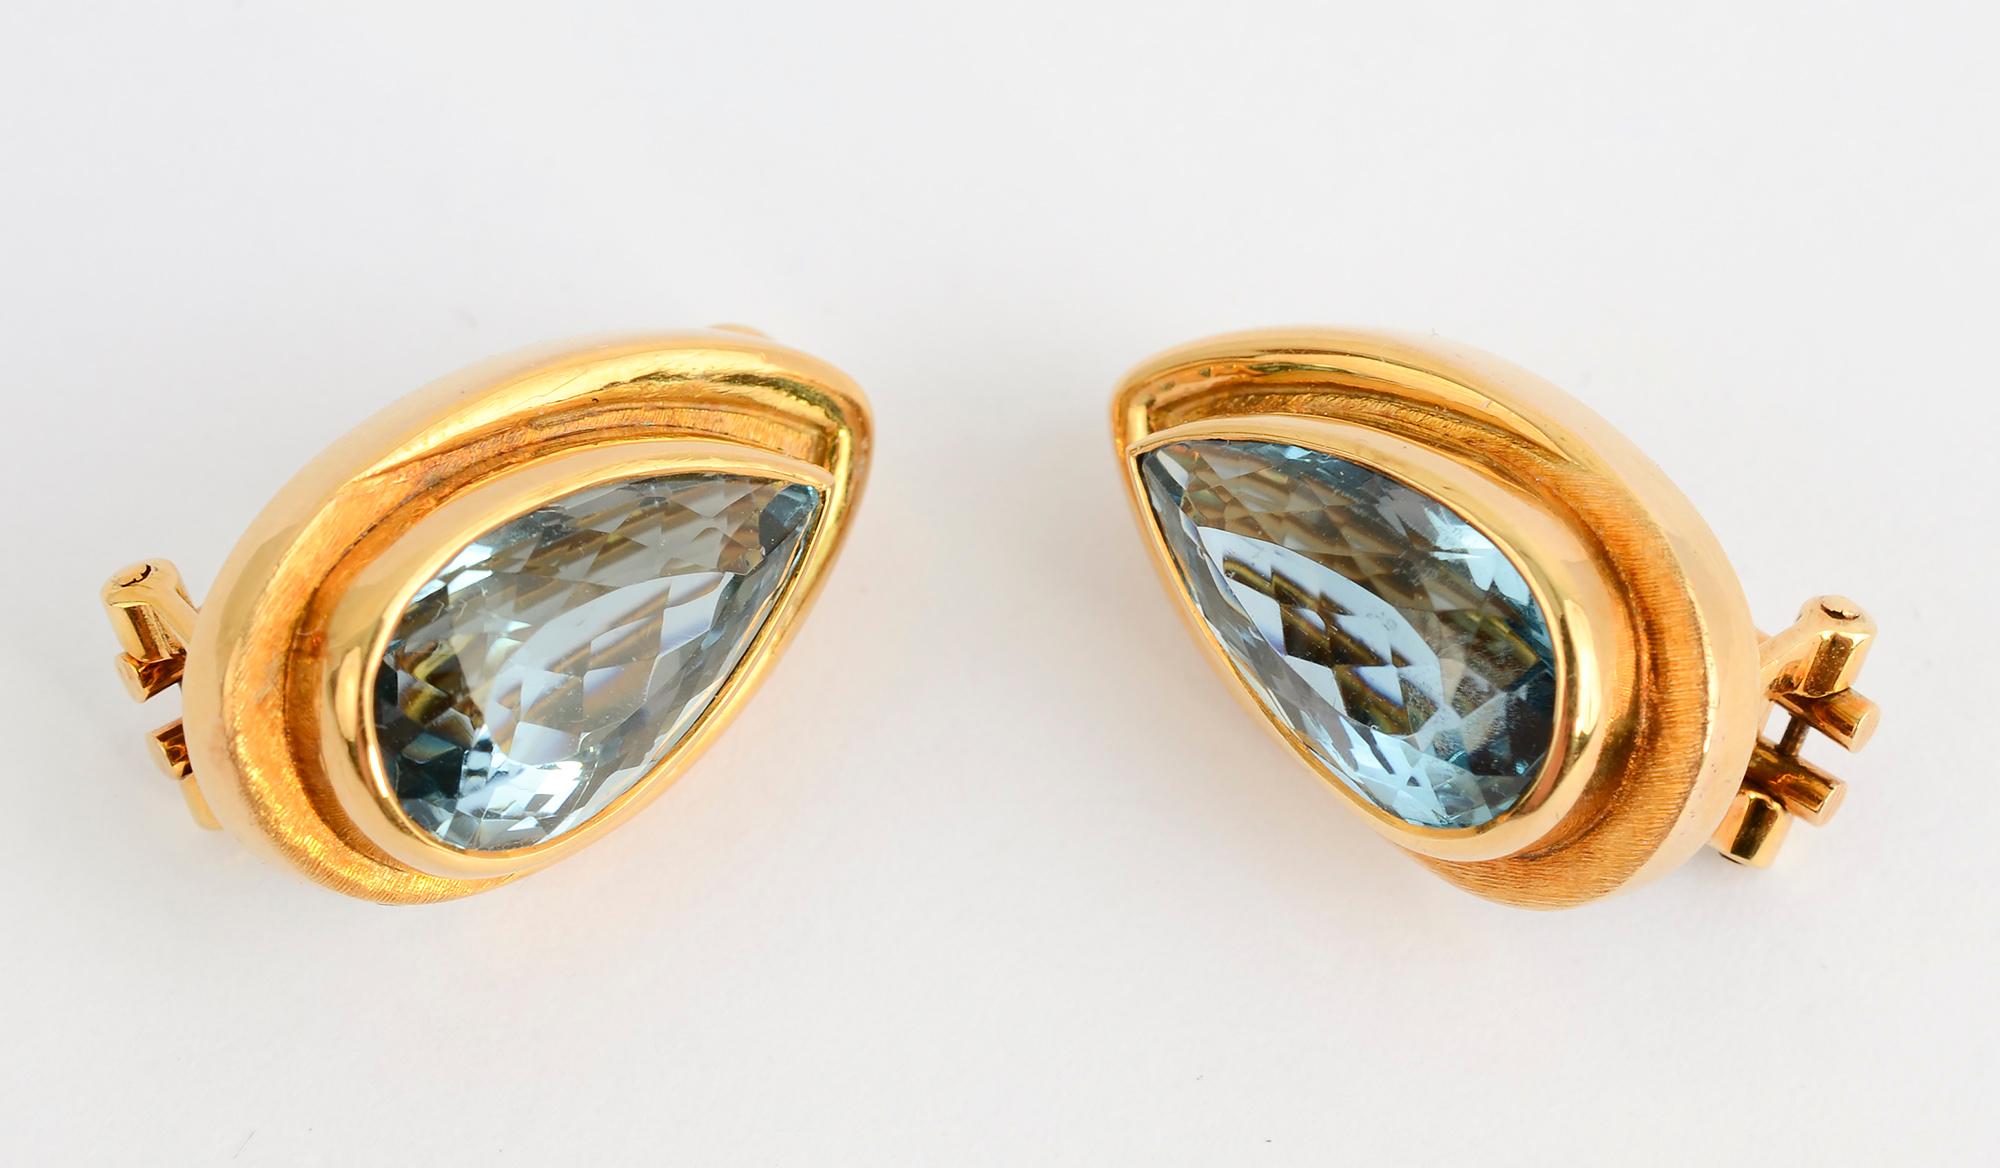 Beautiful blue topaz earrings  by Brazilian designer, Haroldo Burle Marx. Marx was known, in part, for the fine quality of the stones he worked with. The earrings are 1 inch in length and 9/16